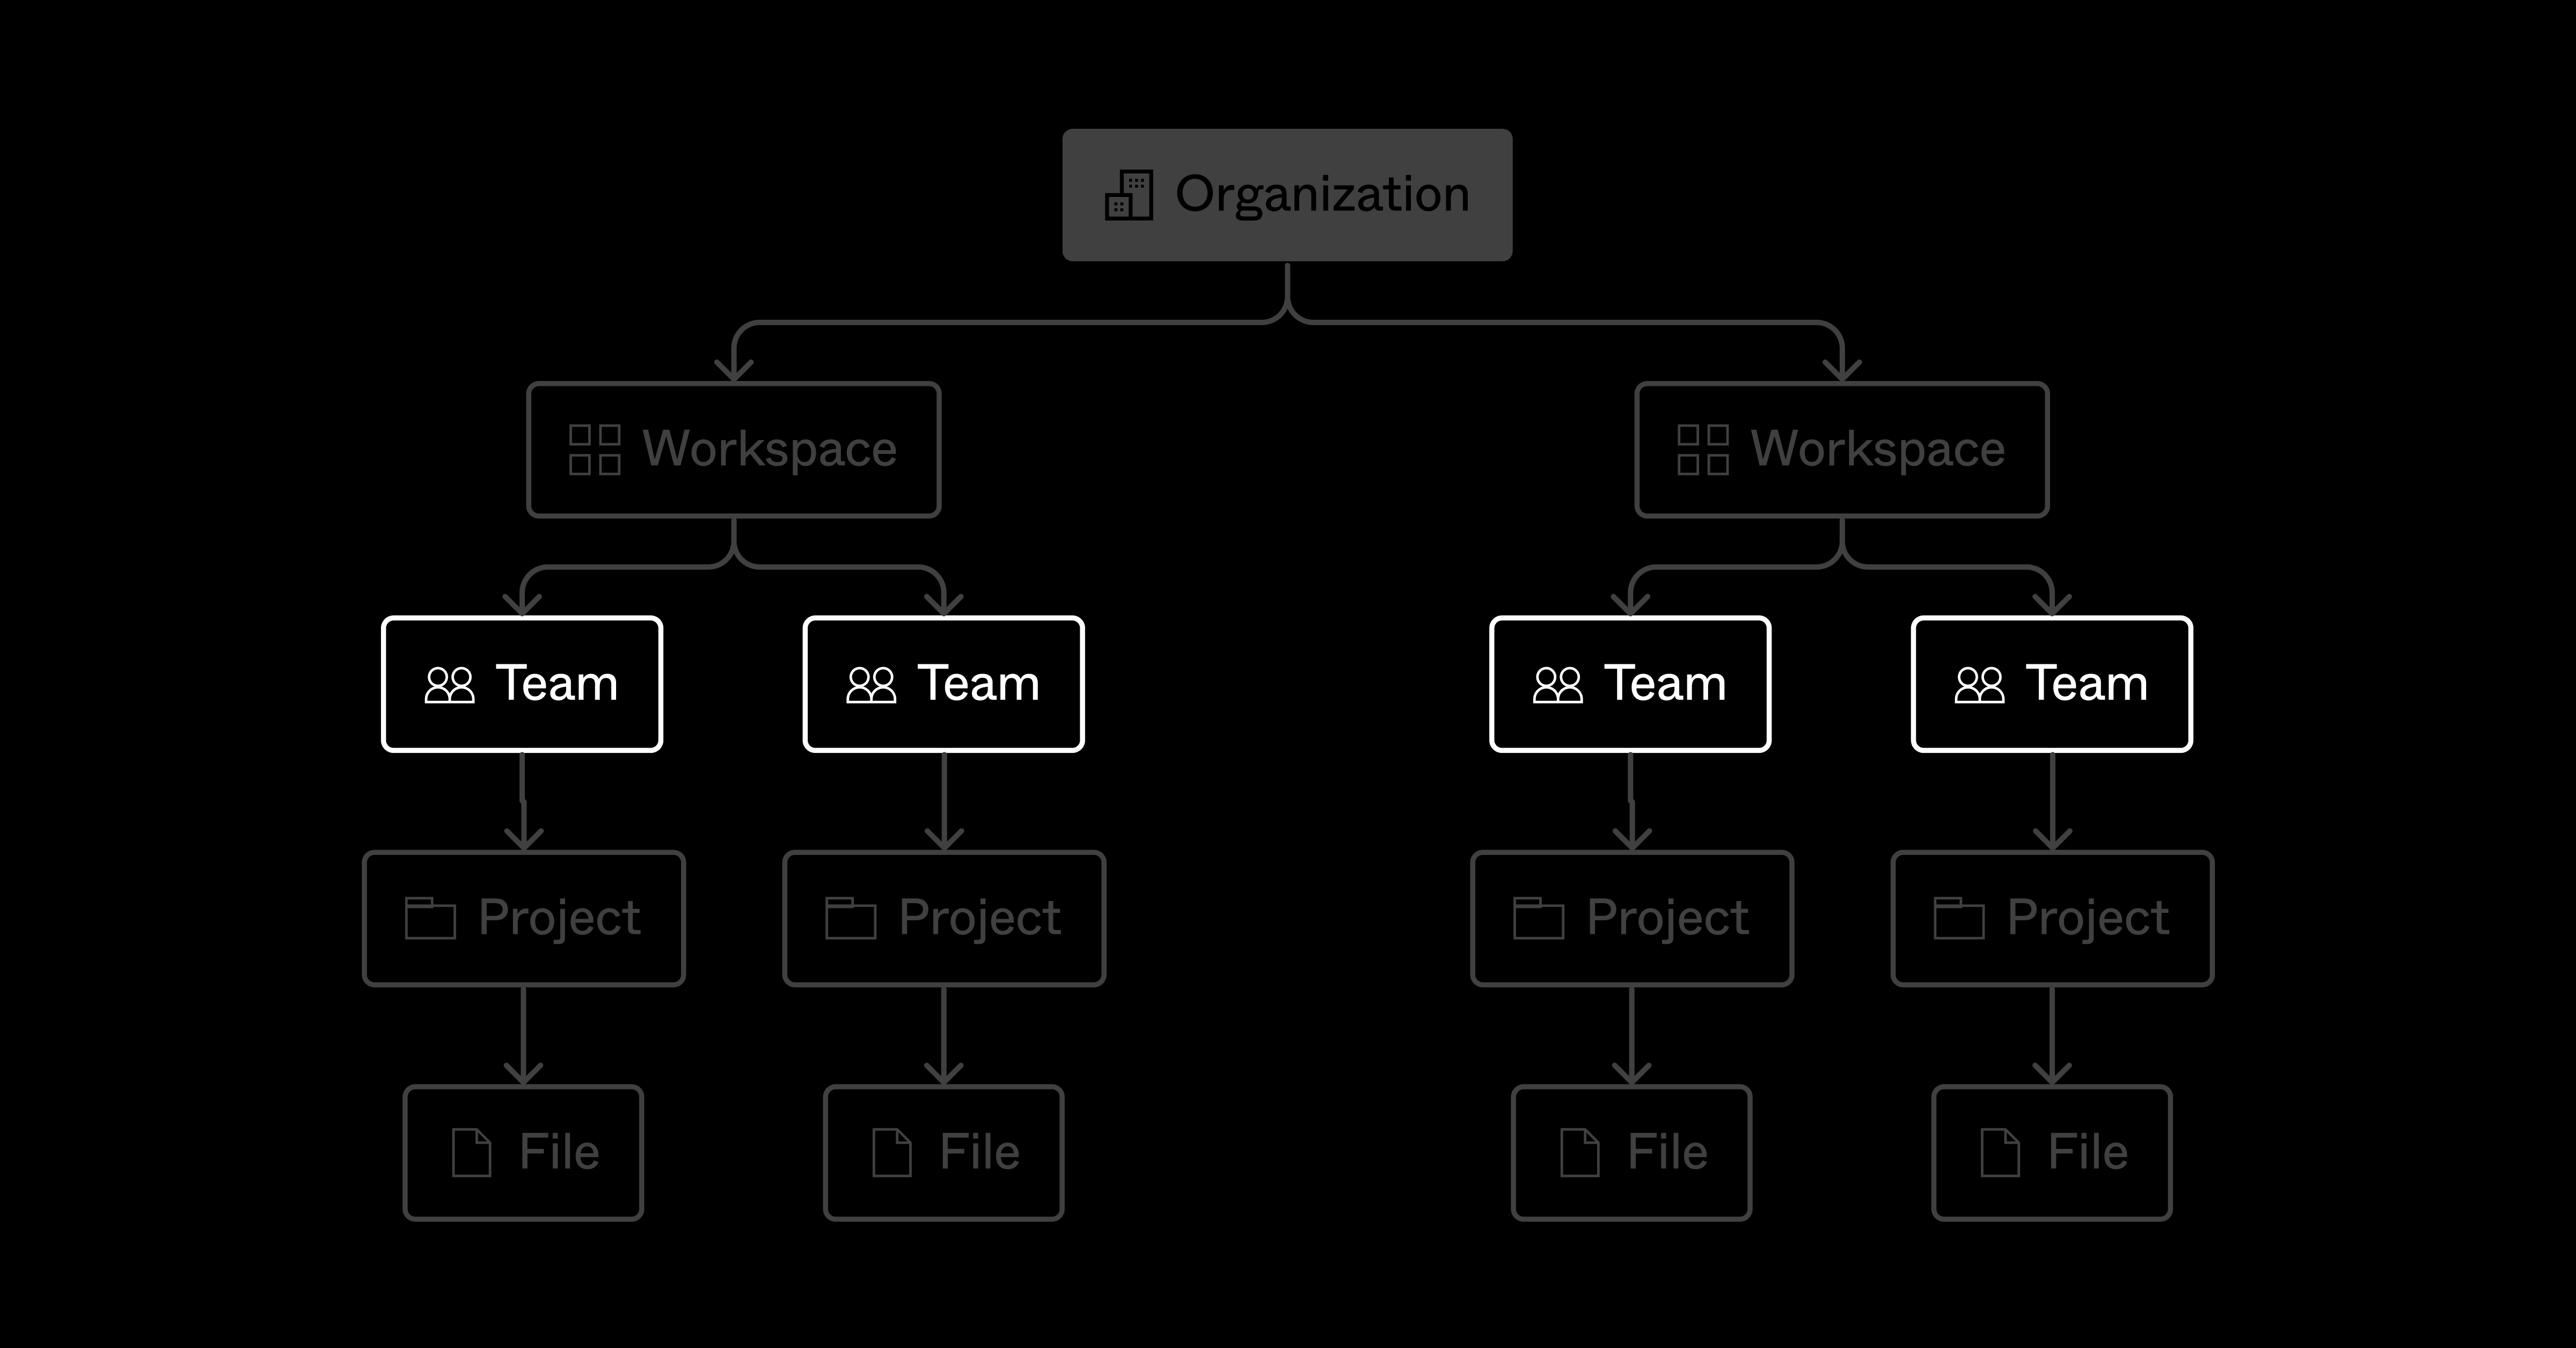 A visual representation of the Figma organization structure. From top to bottom, the labels read: "Organization," "Workspace," "Team," "Project," "File." Everything apart from "Team" is transparent, bringing "Team" into prominence.